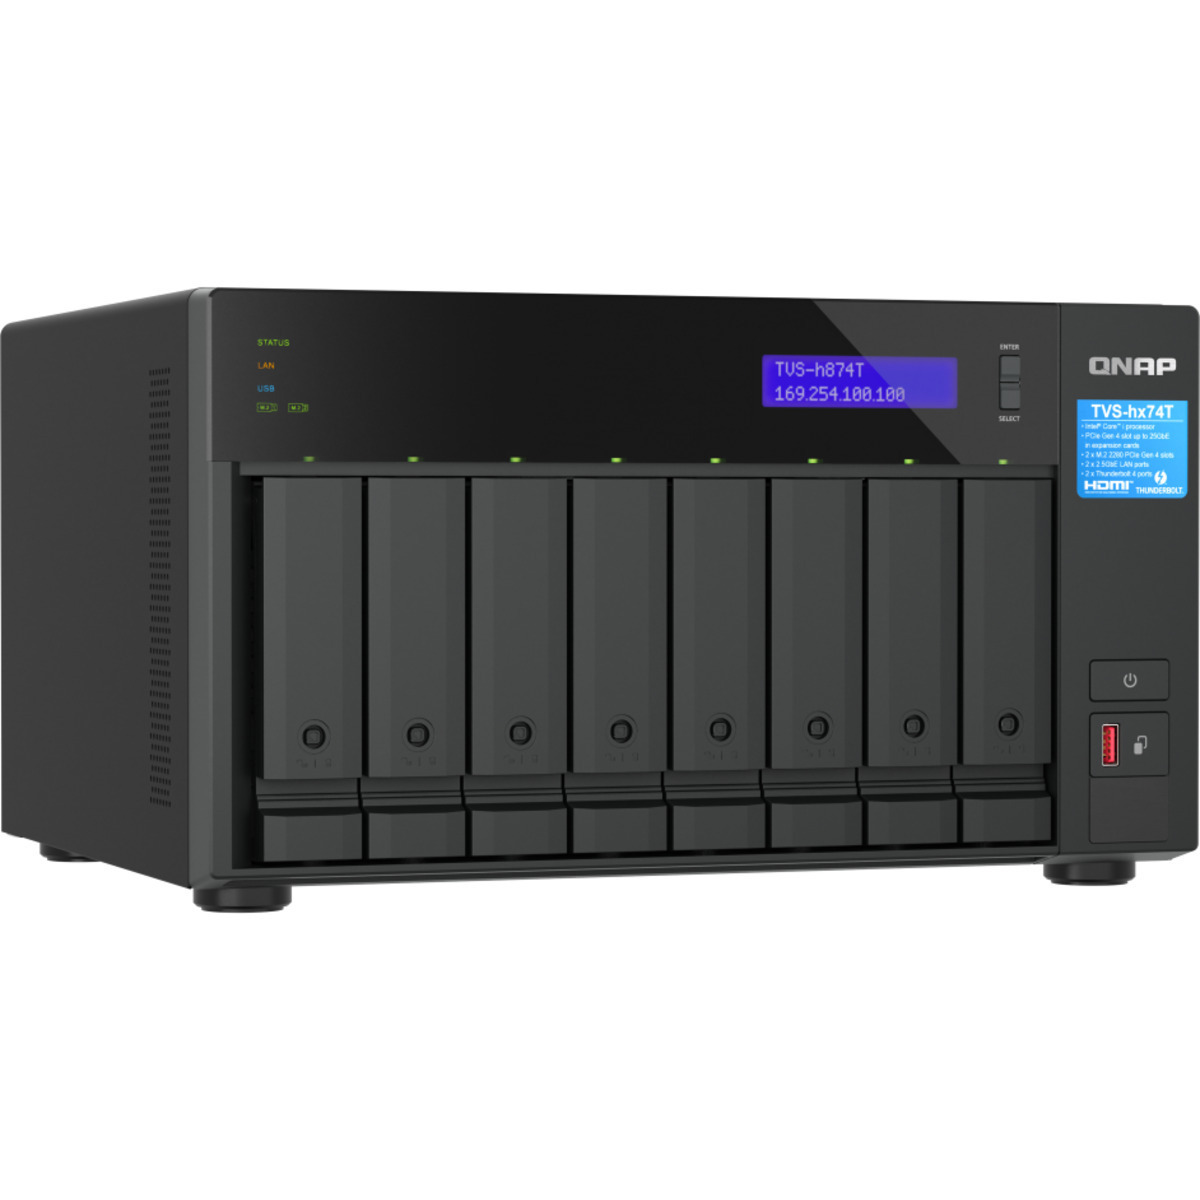 QNAP TVS-h874T Core i9 Thunderbolt 4 80tb 8-Bay Desktop Multimedia / Power User / Business DAS-NAS - Combo Direct + Network Storage Device 5x16tb Seagate IronWolf Pro ST16000NT001 3.5 7200rpm SATA 6Gb/s HDD NAS Class Drives Installed - Burn-In Tested - ON SALE TVS-h874T Core i9 Thunderbolt 4